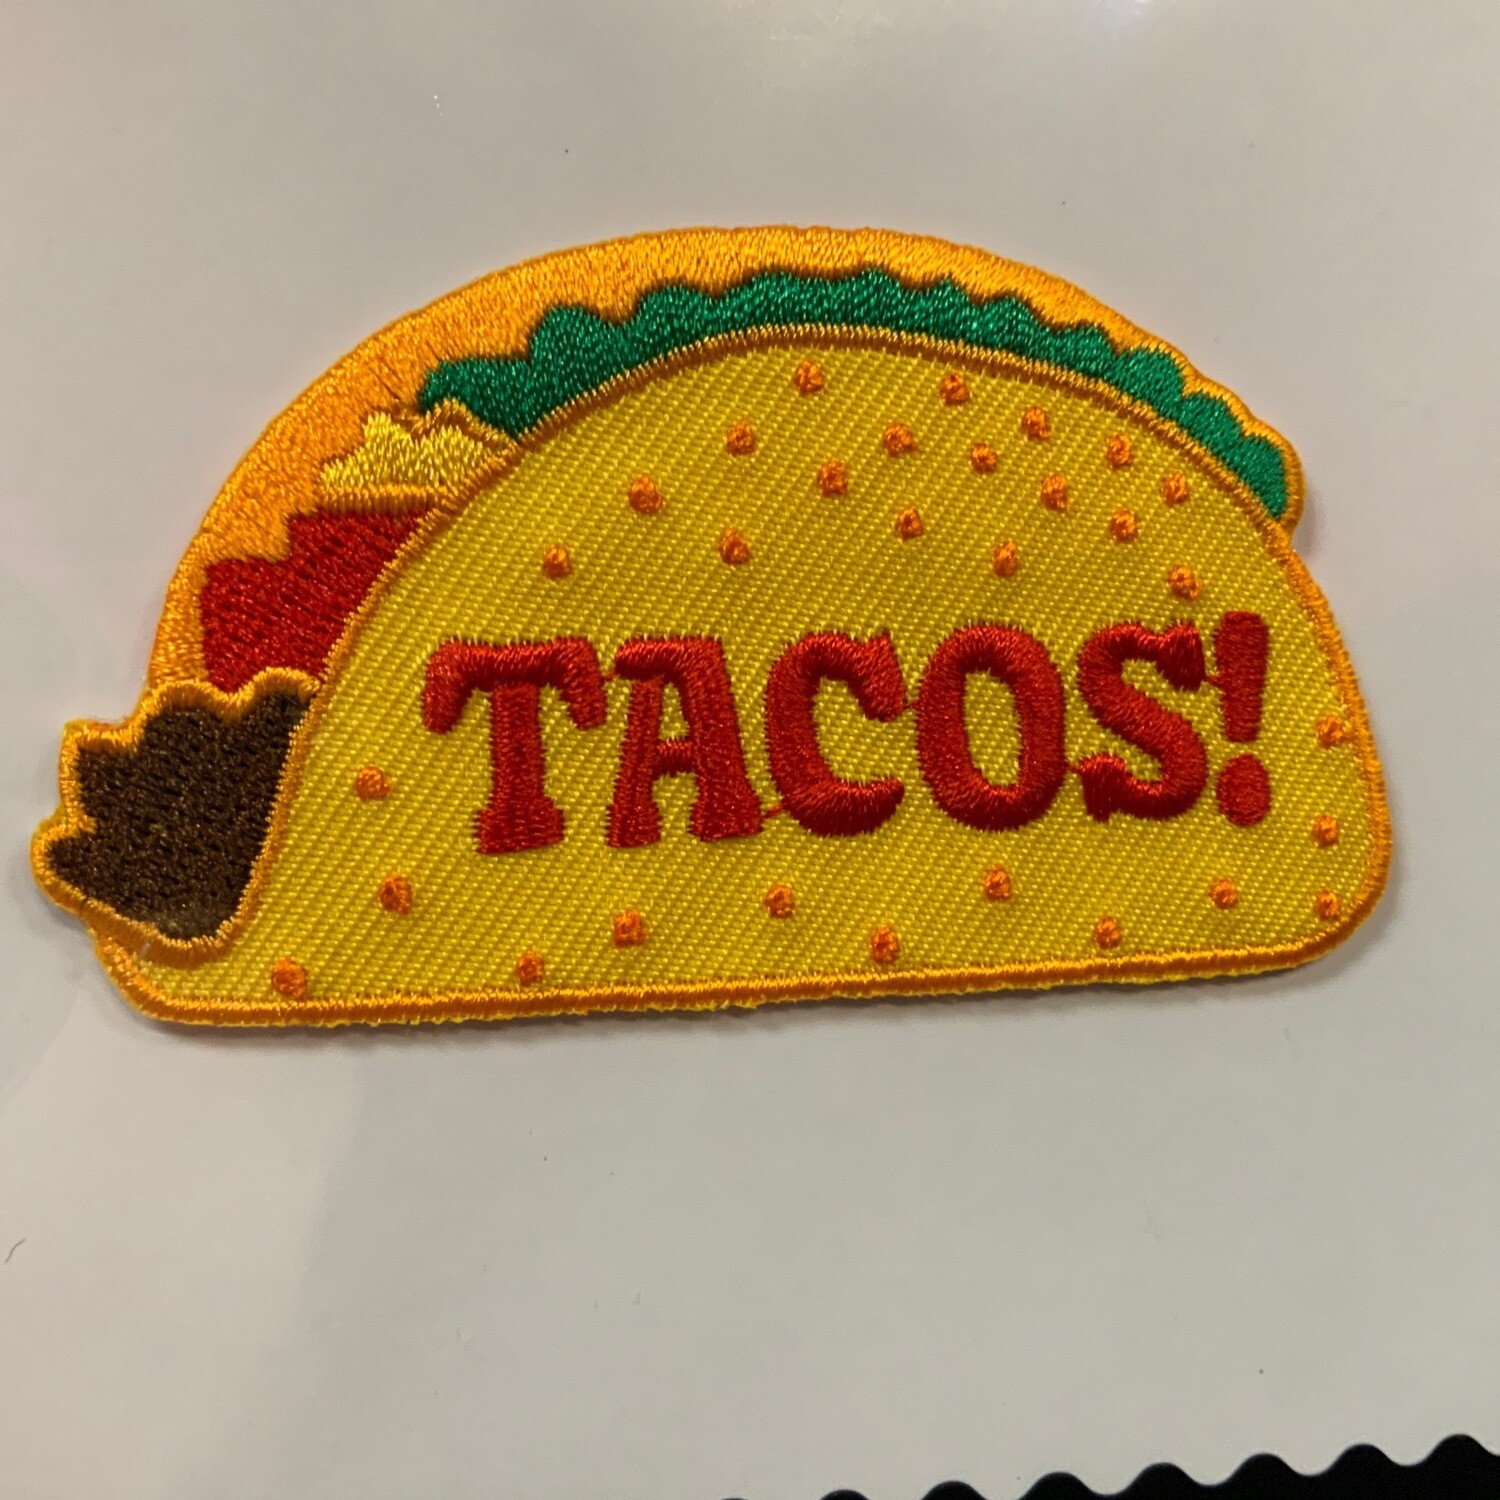 Tacos - Embroidered Patch from These Are Things